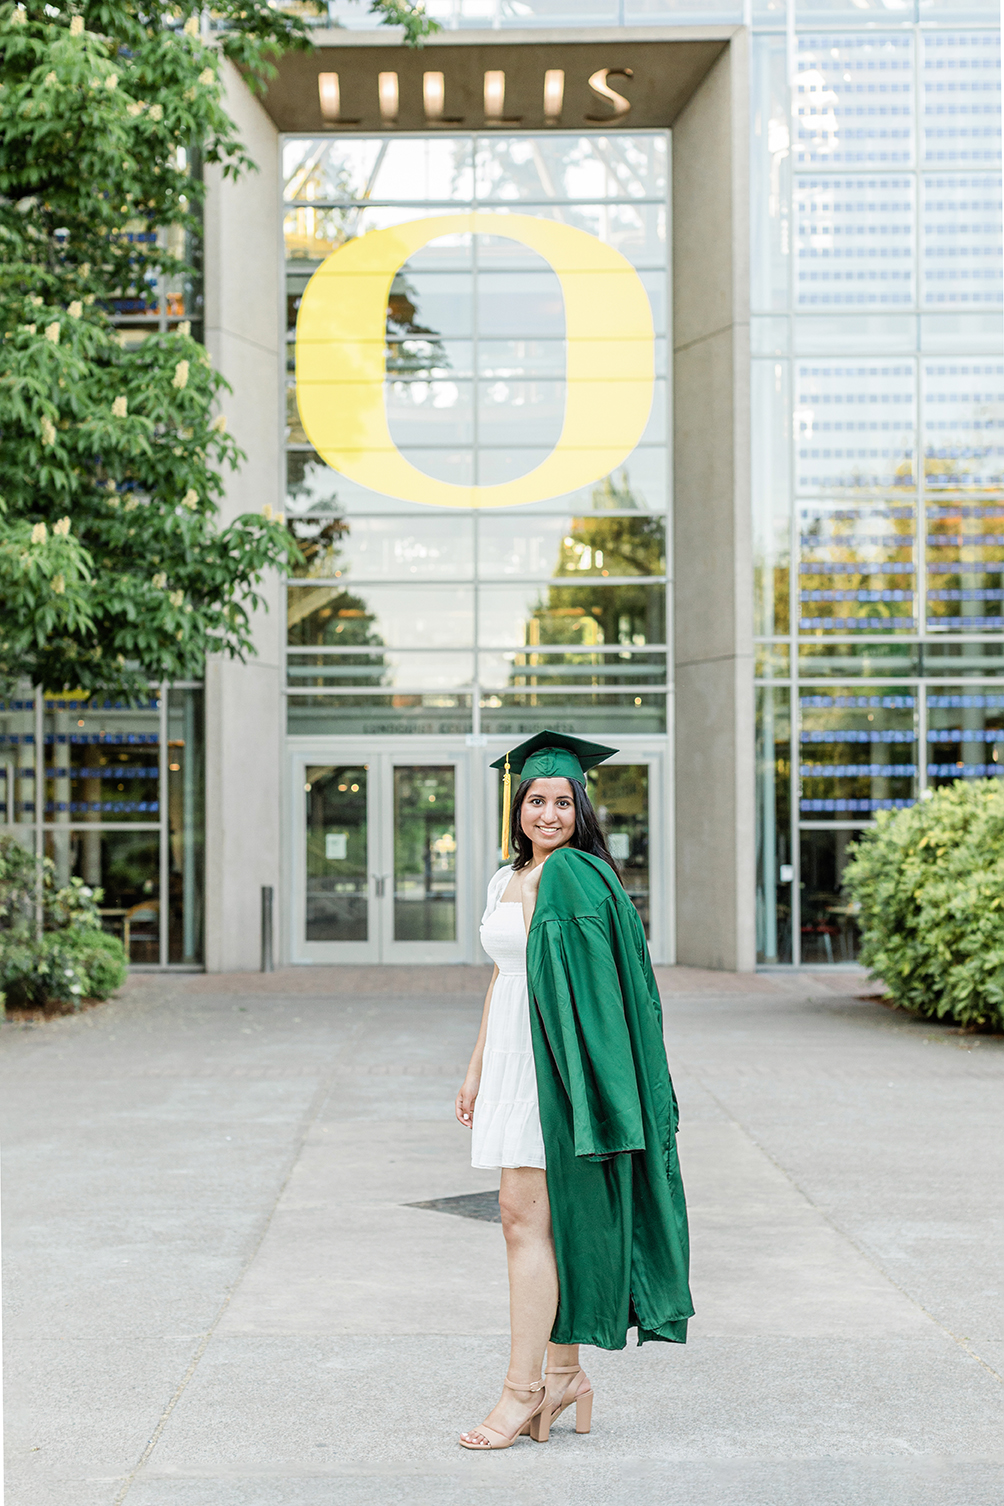 University of Oregon graduate in green cap and gown Eugene girl